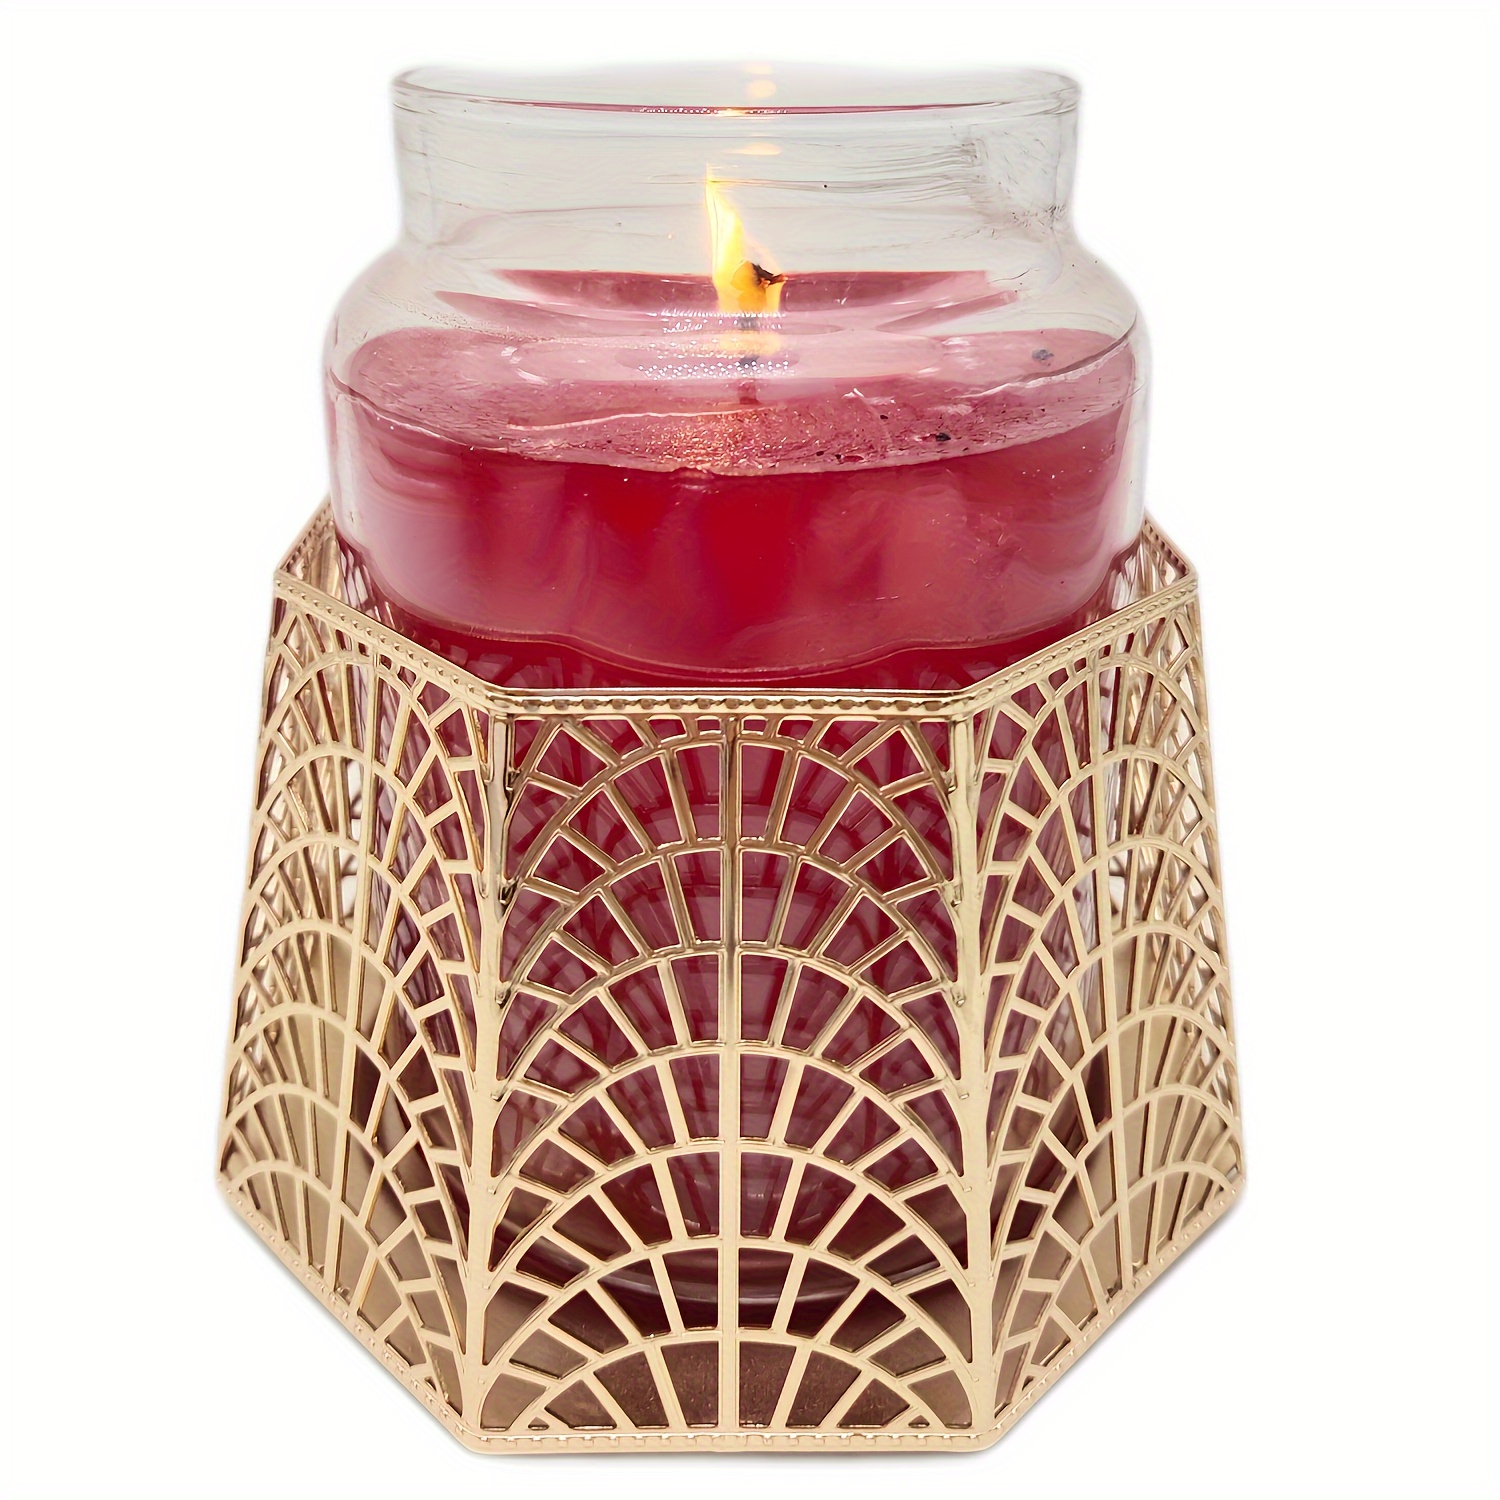 img.kwcdn.com/product/candle-holder/d69d2f15w98k18